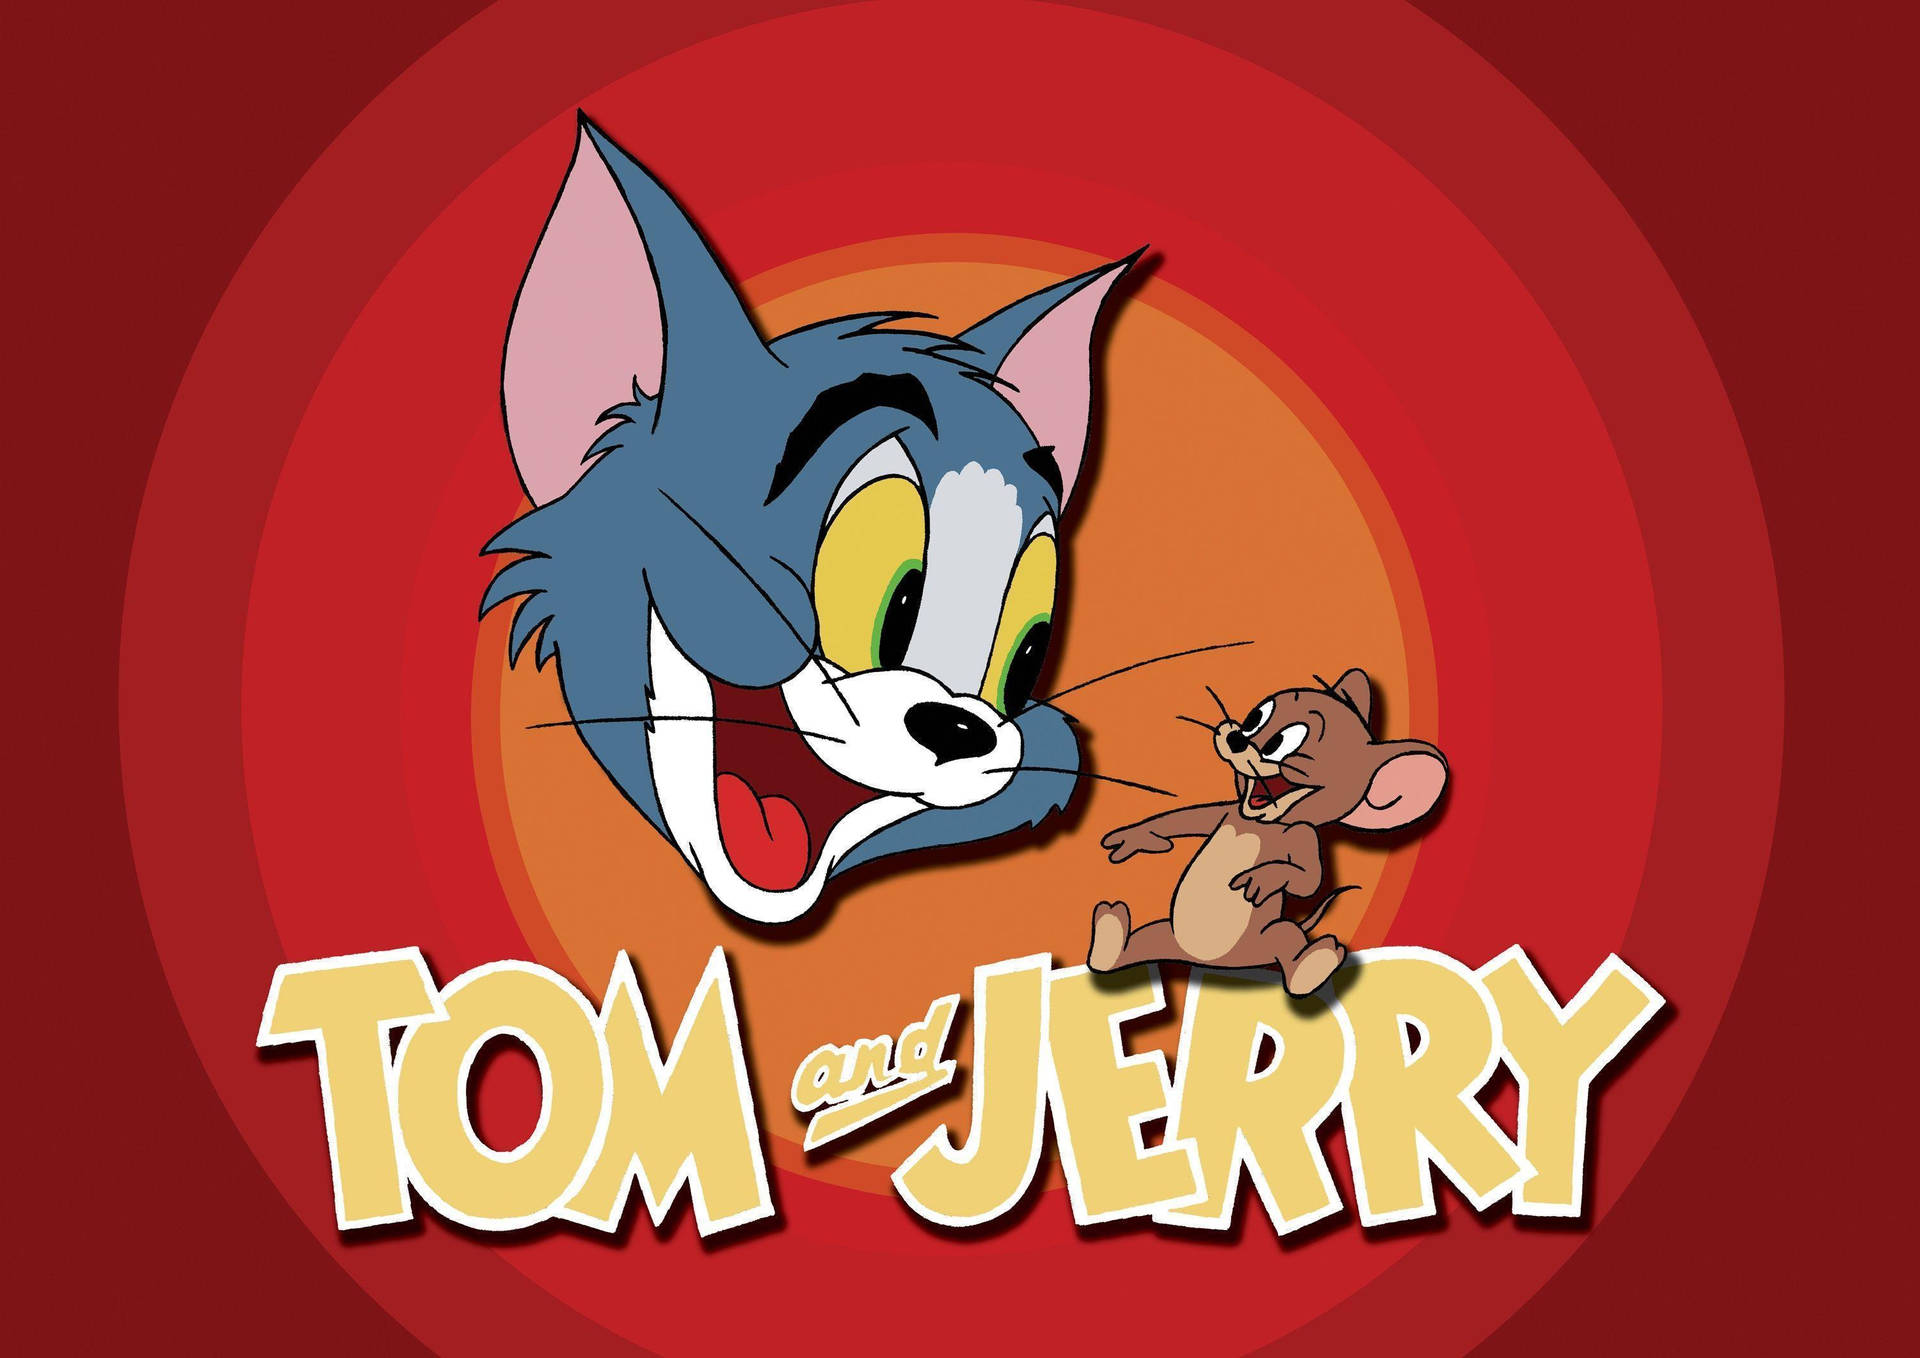 Free Jerry Mouse Wallpaper Downloads, [100+] Jerry Mouse Wallpapers for  FREE 